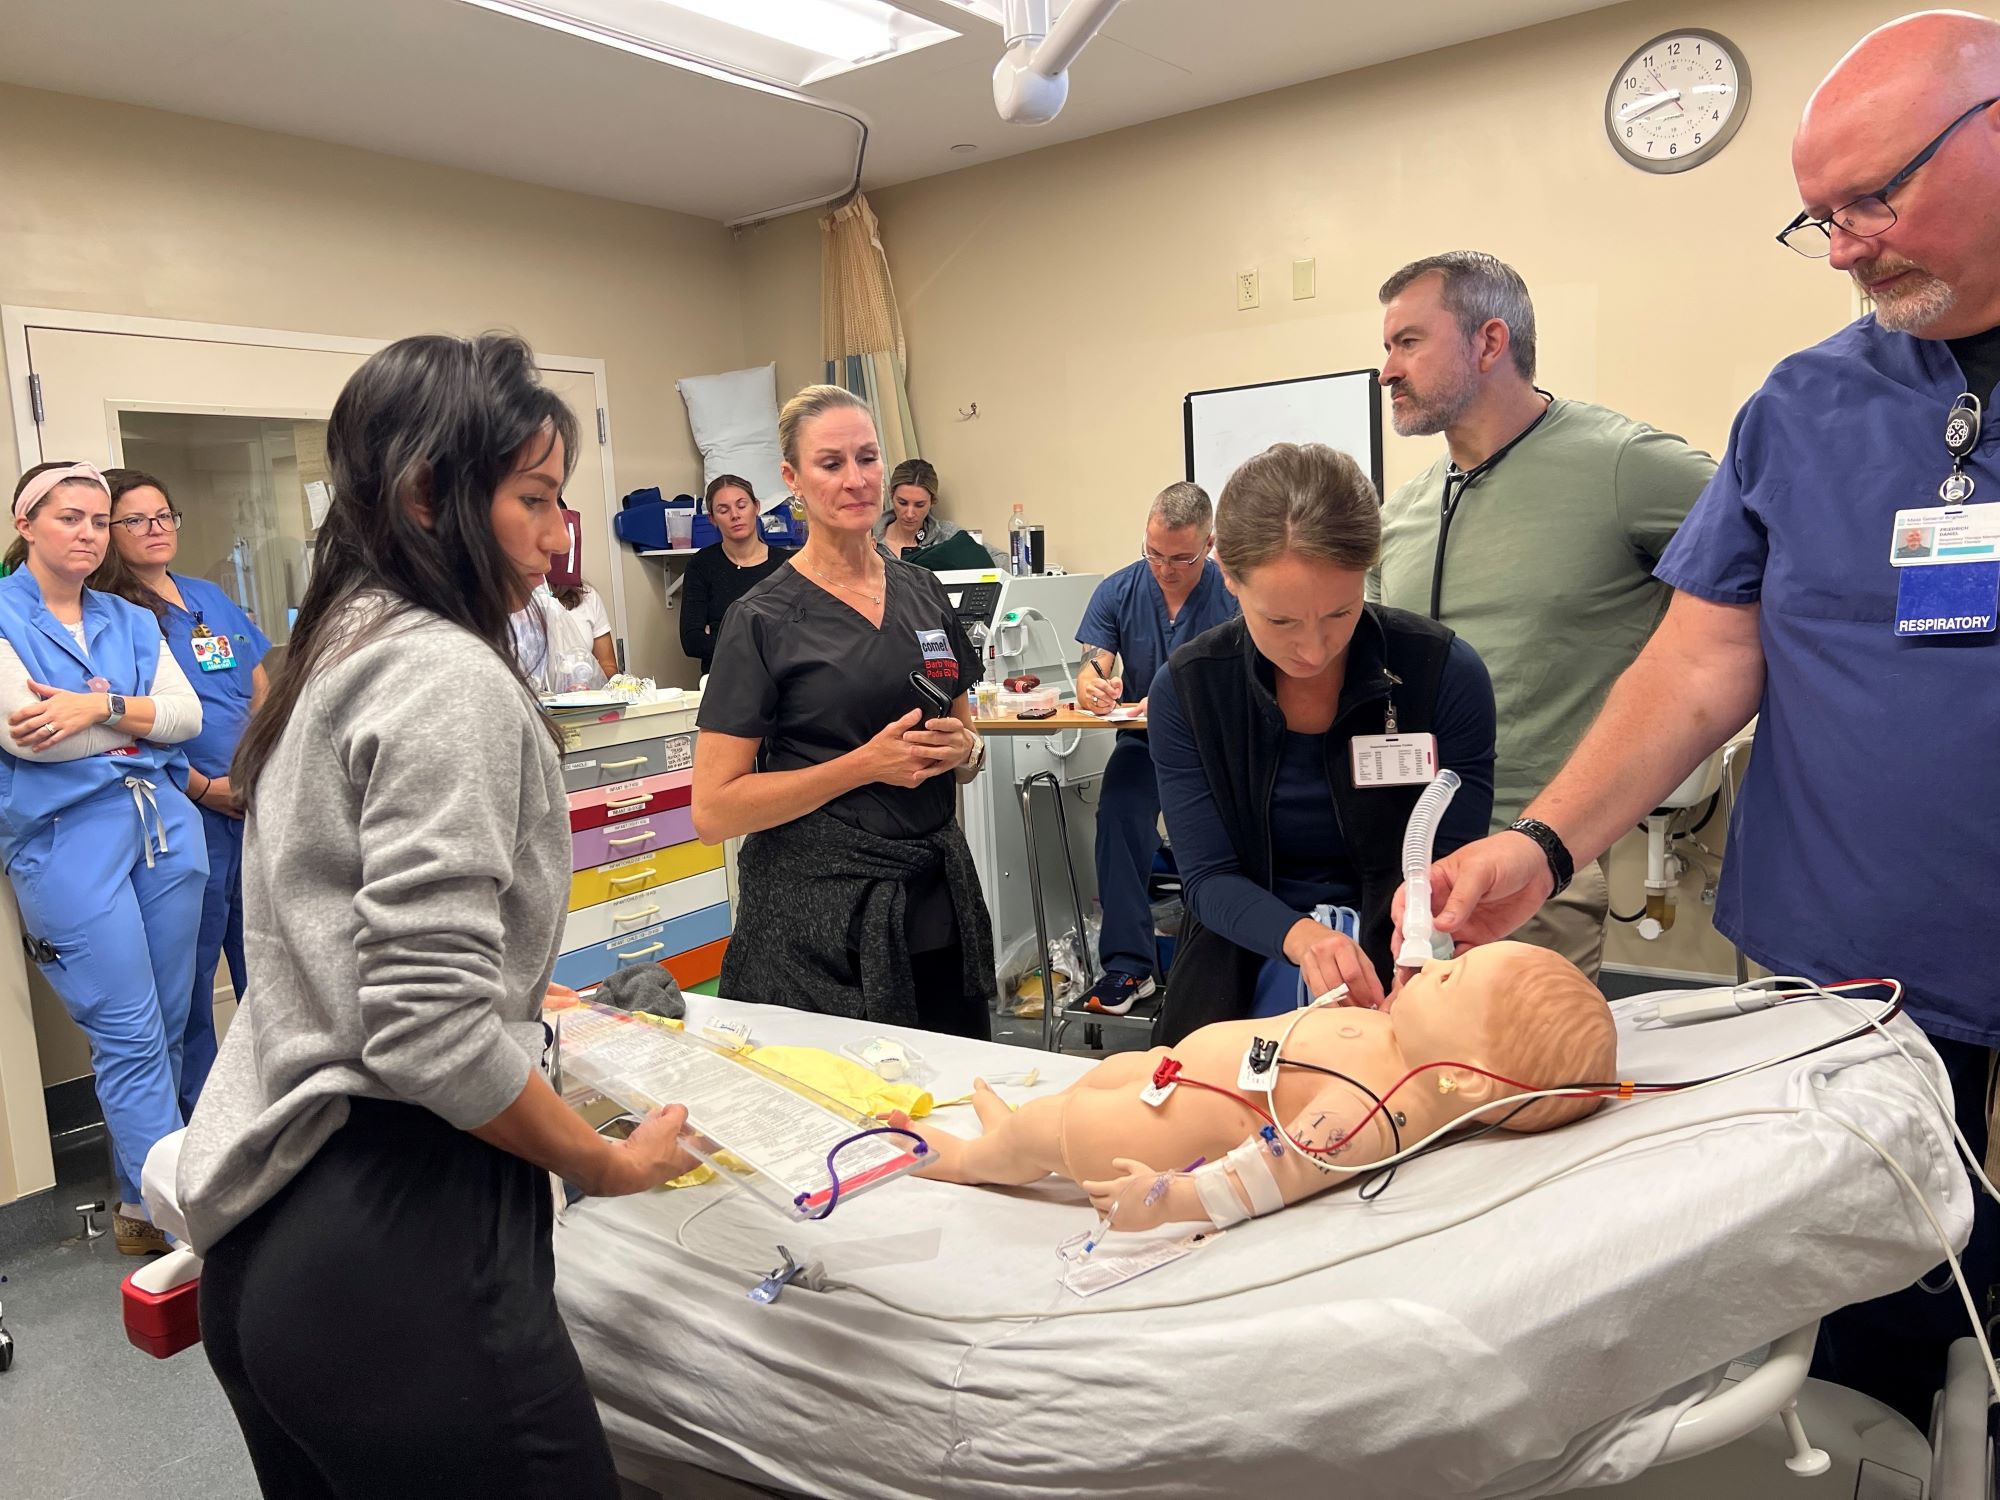 Emergency Department uses pediatric training to stay sharp